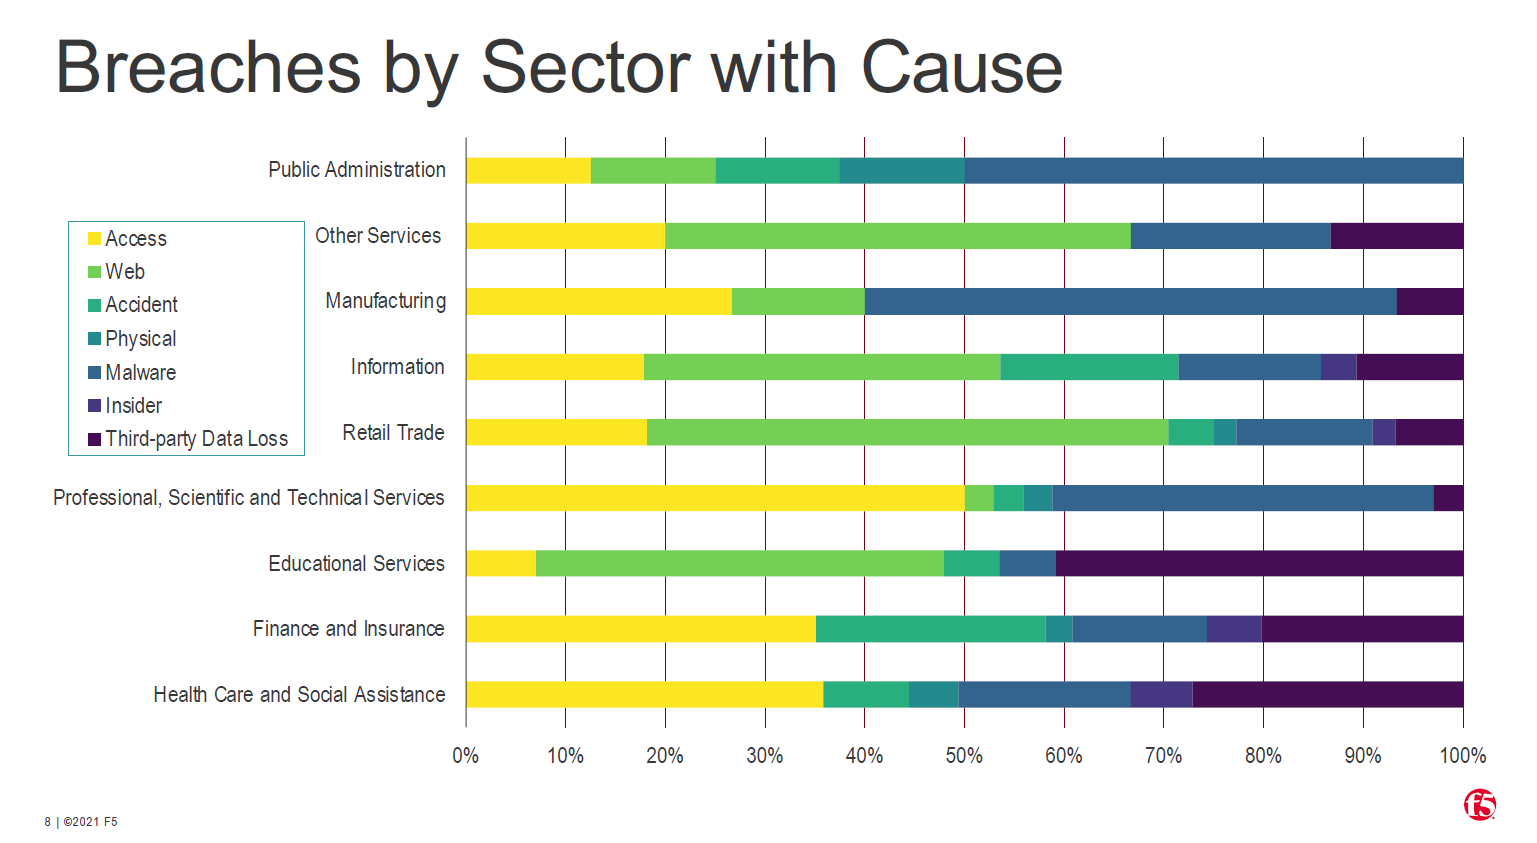 Breaches by sector with cause